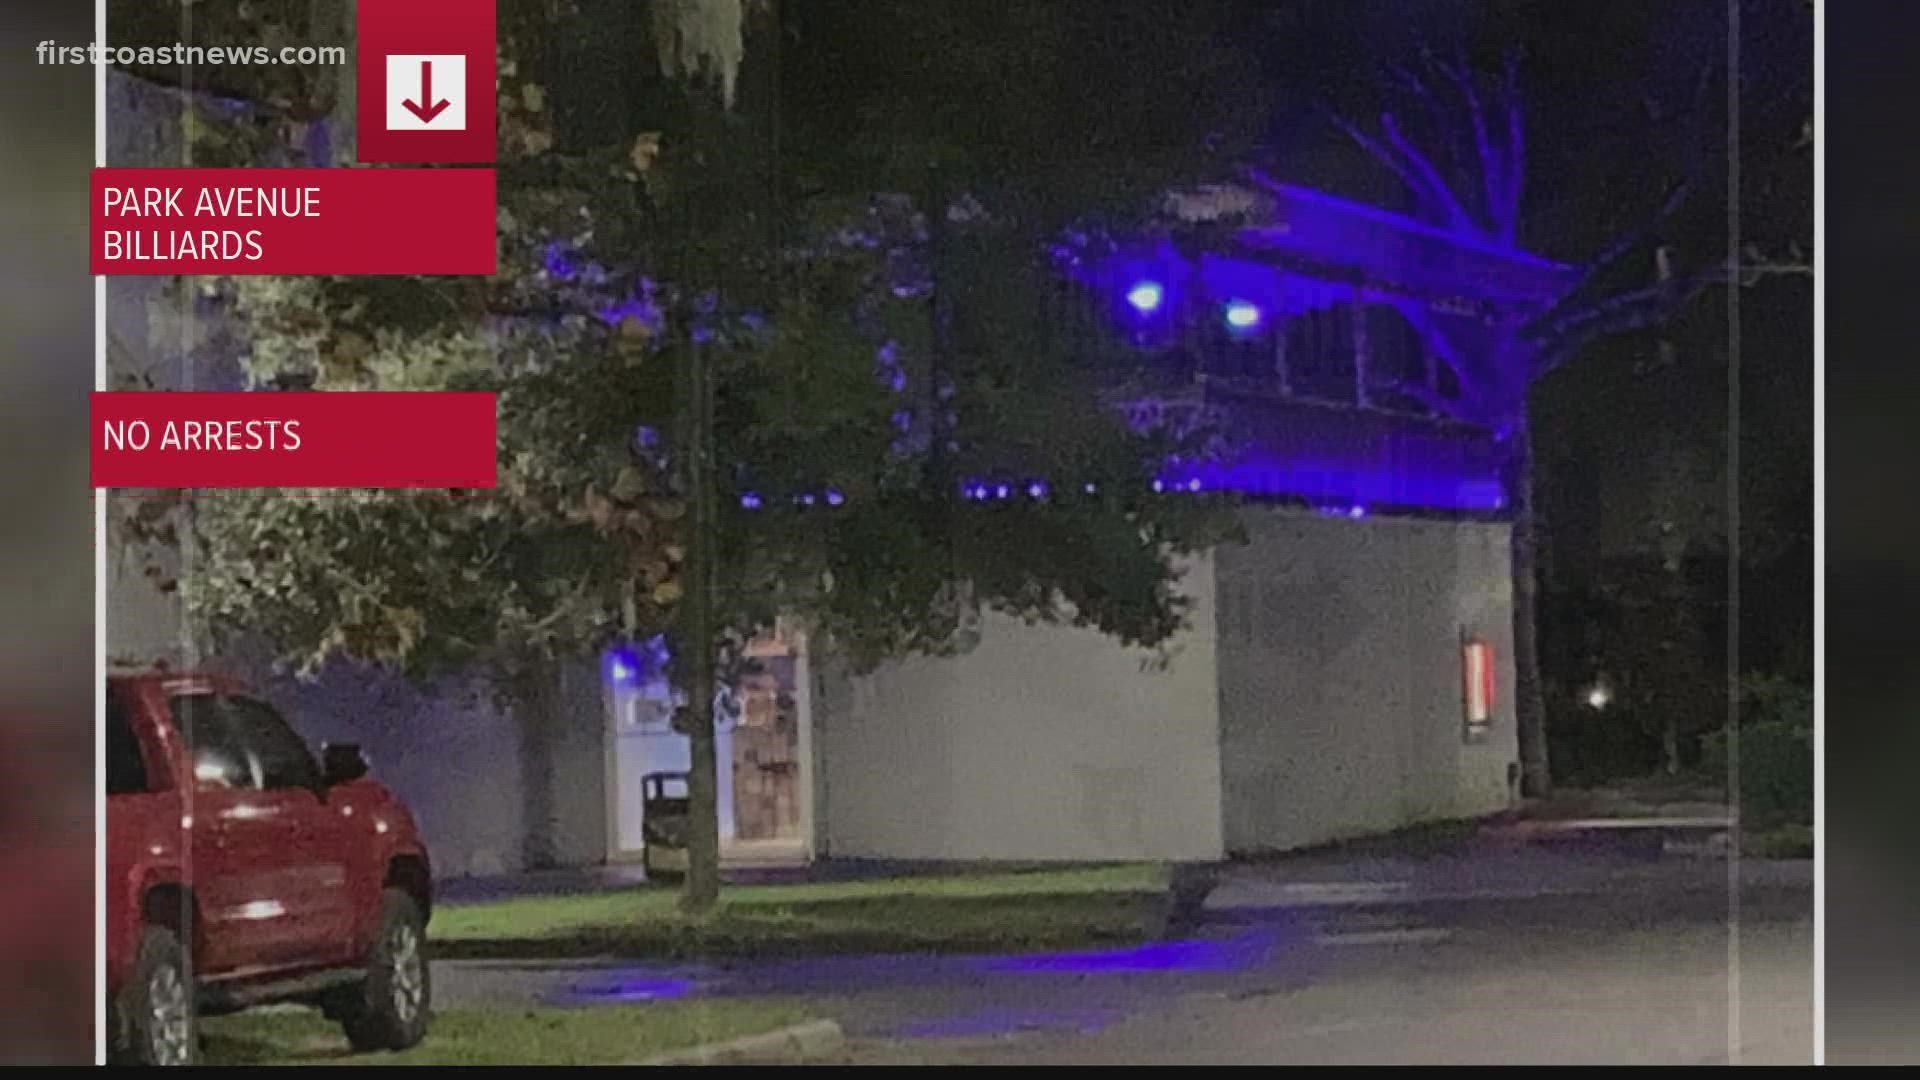 Orange Park Police were called to Park Avenue Billiards, where investigators believe an argument led to the shooting. The victim is expected to survive.